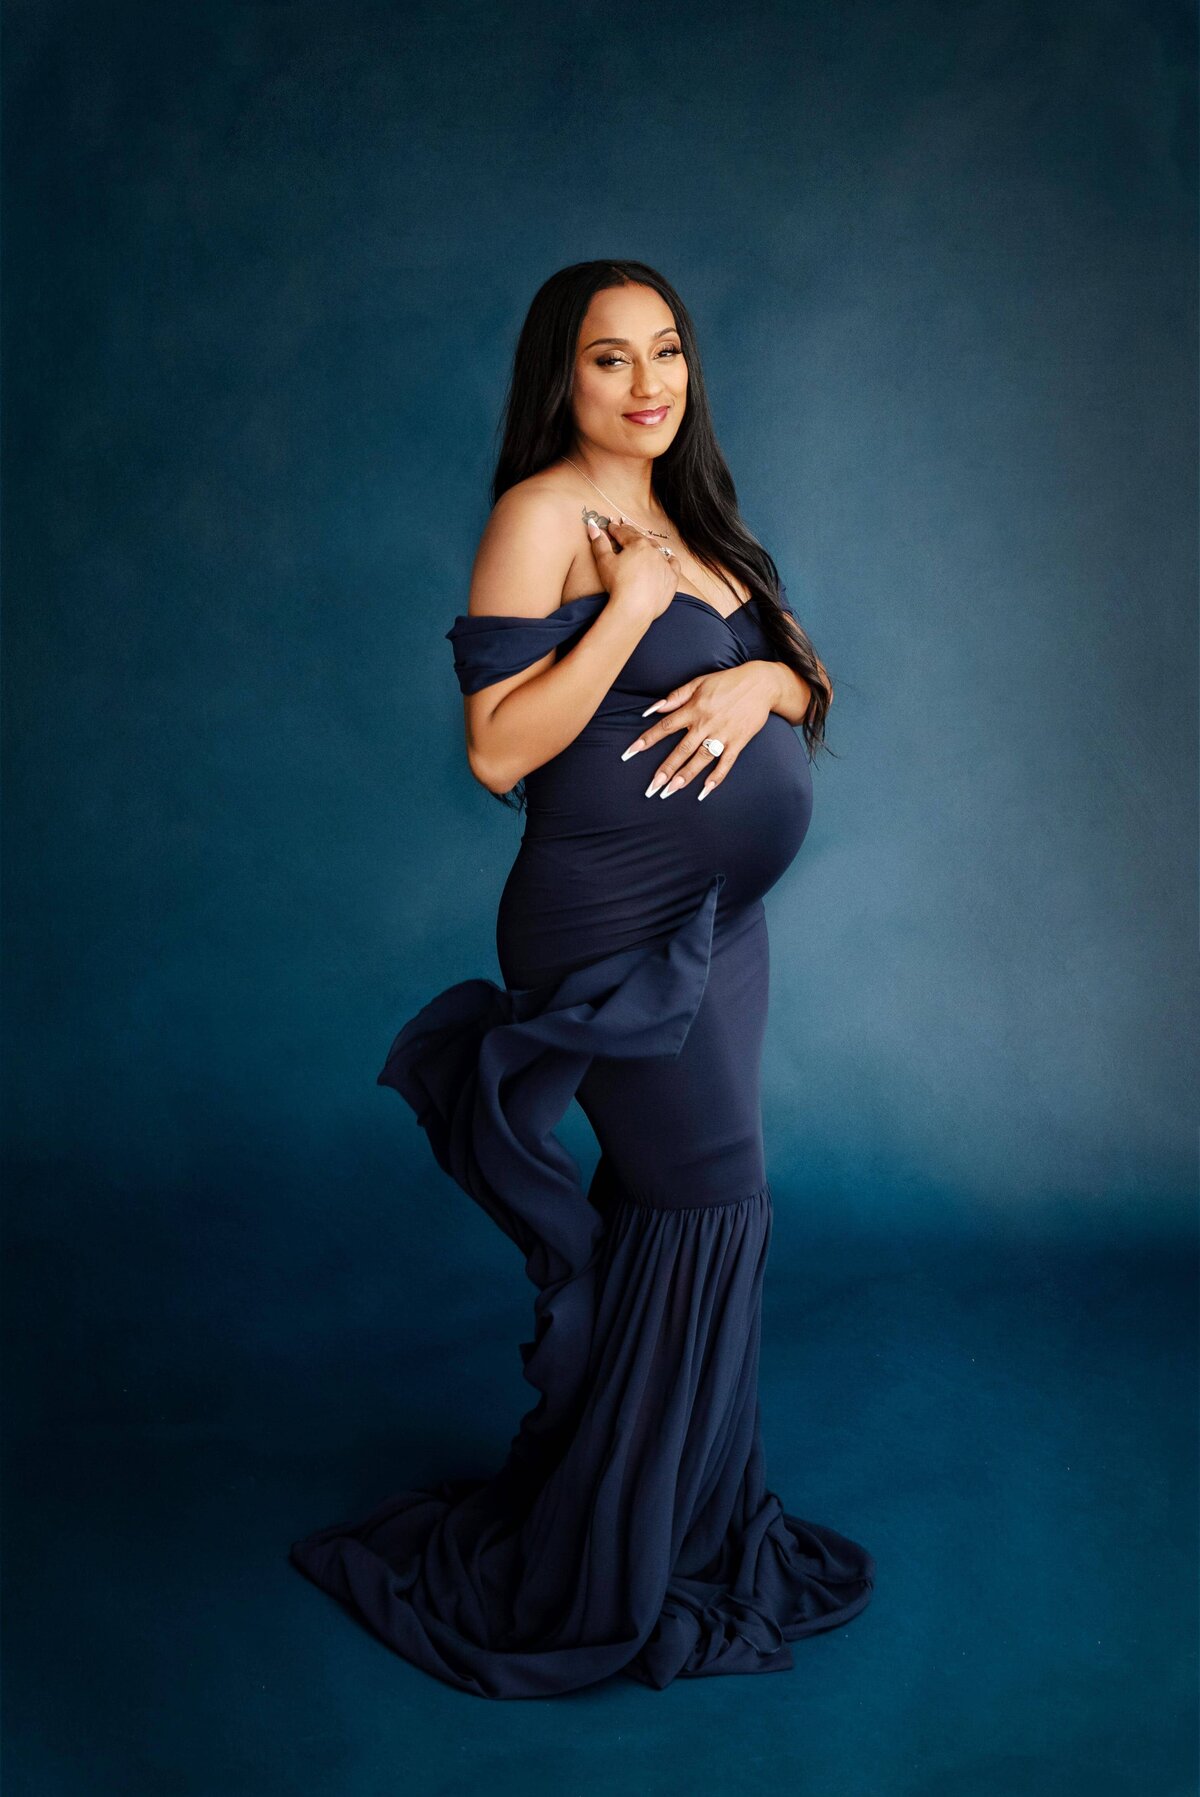 st-louis-maternity-photographer-pregnant-mom-in-monocromatic-blue-gown-on-blue-backdrop